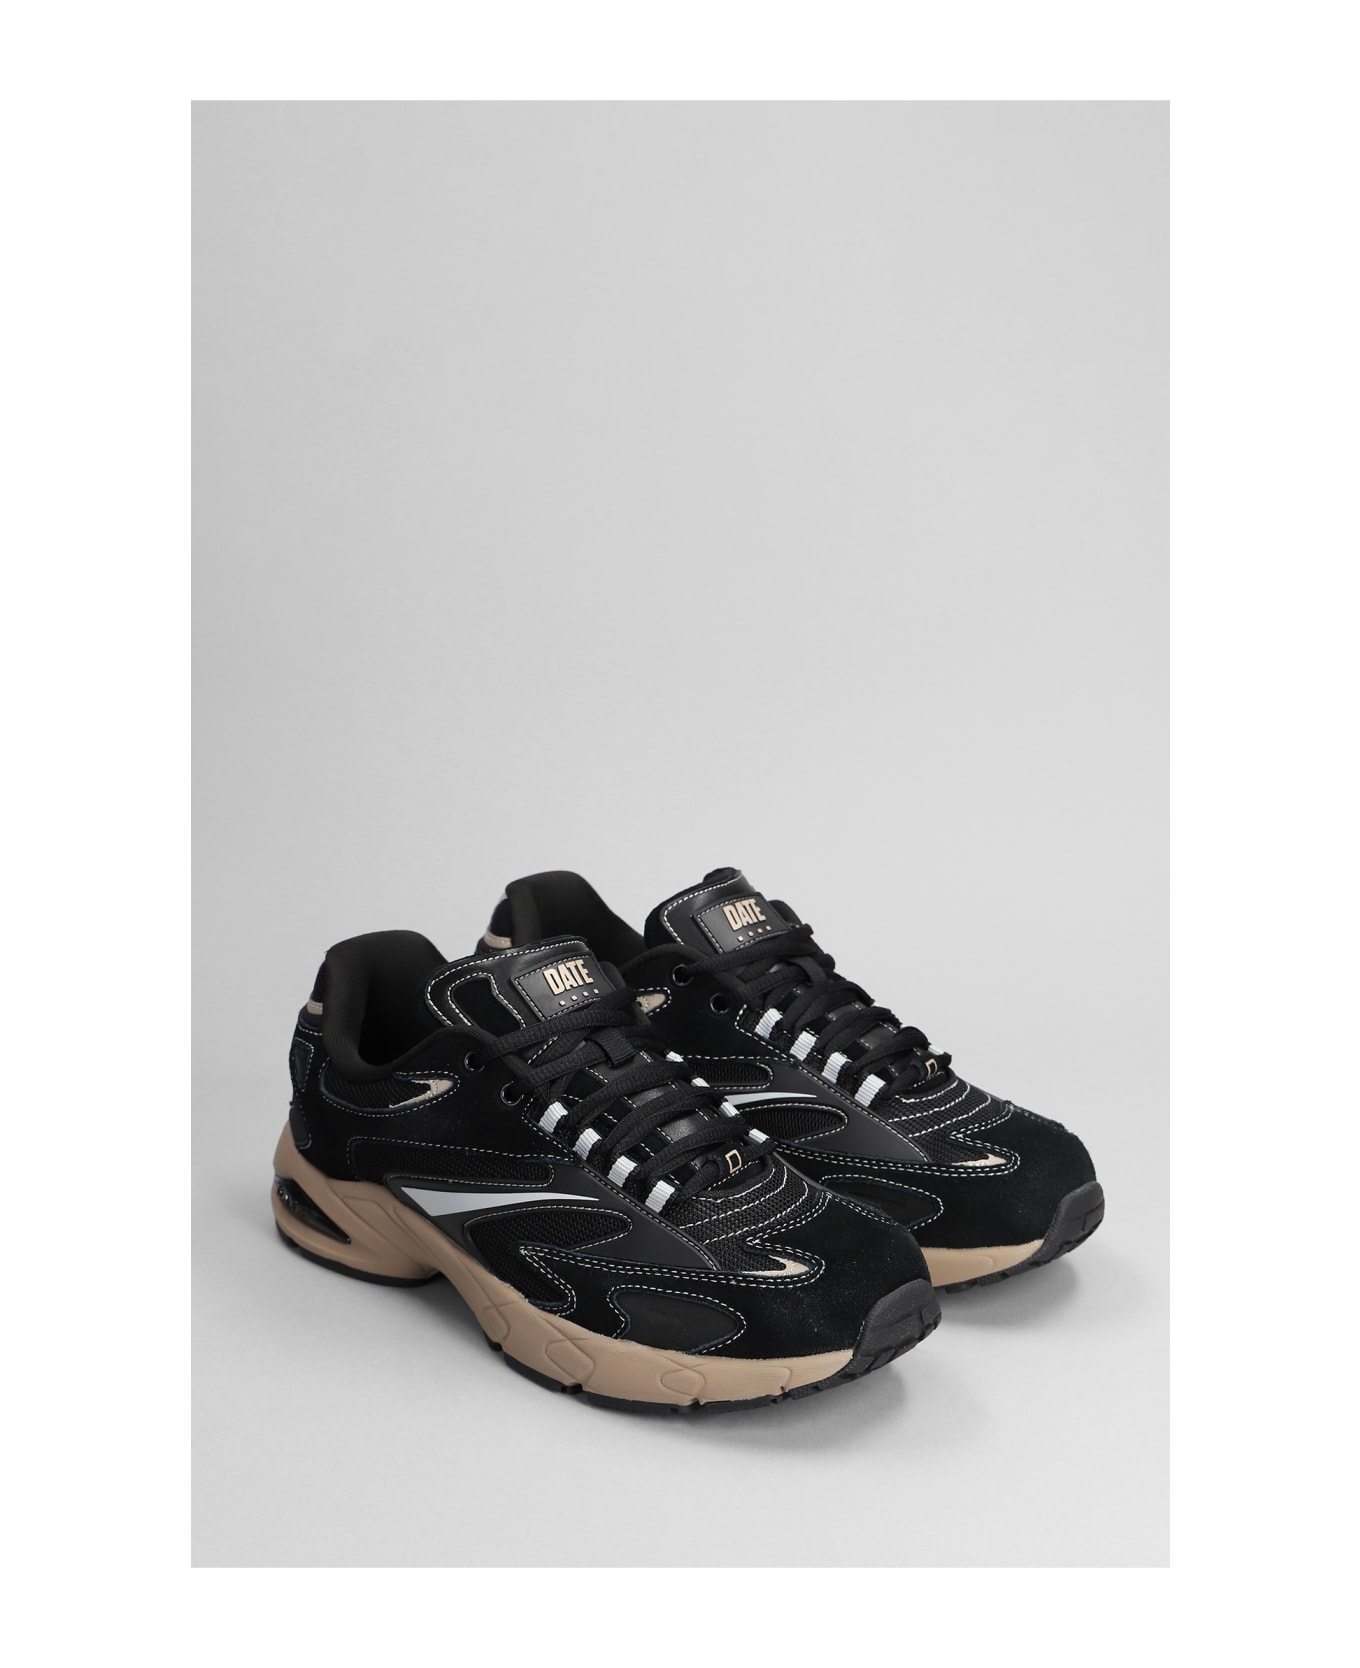 D.A.T.E. Sn 23 Collection Sneakers In Black Suede And Fabric - black